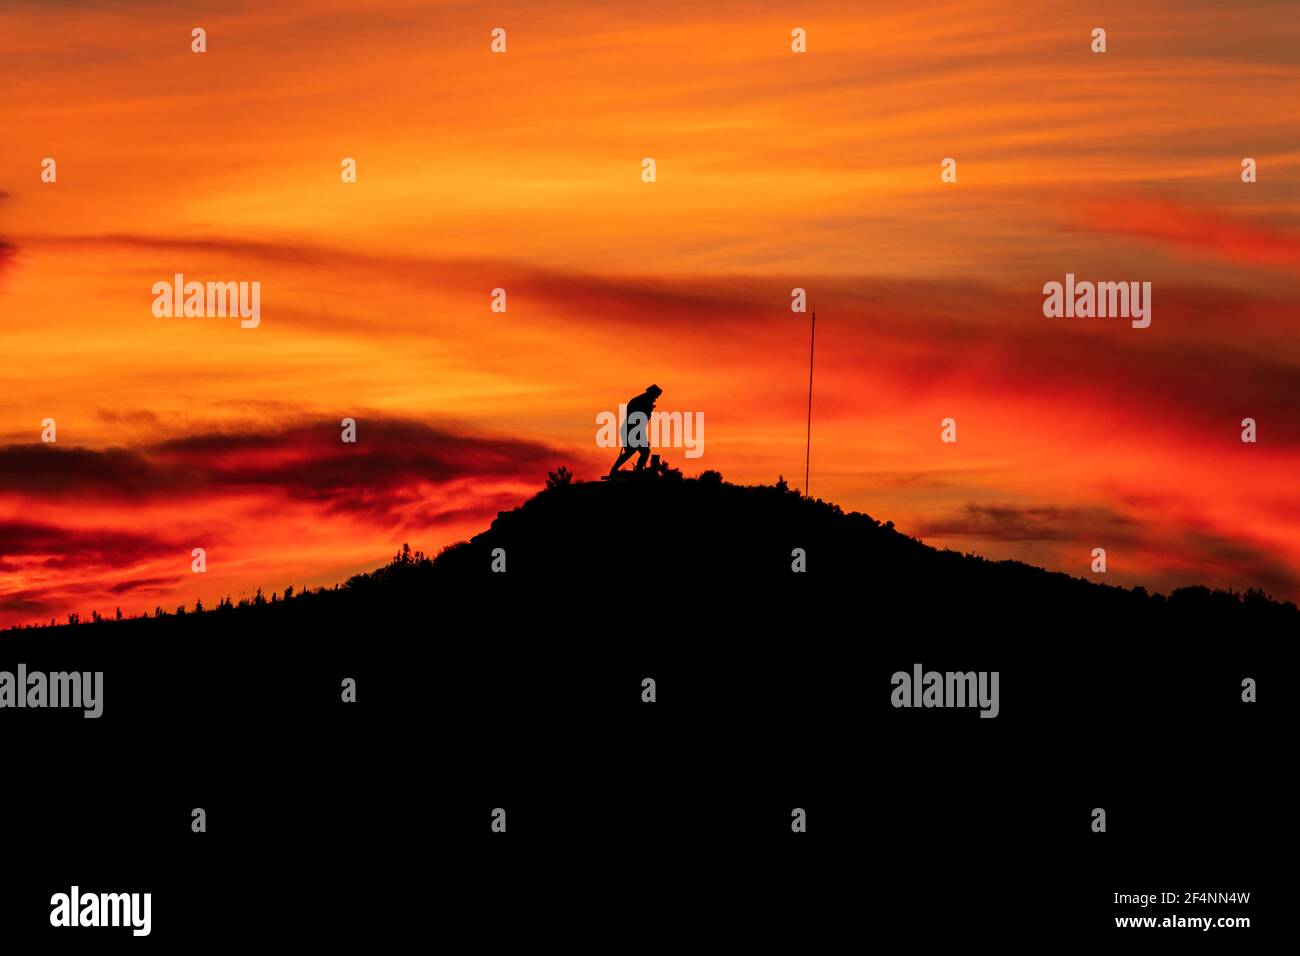 Ataturk silhouette. Climb the mountain with a magnificent cloudy sky sunset. Stock Photo